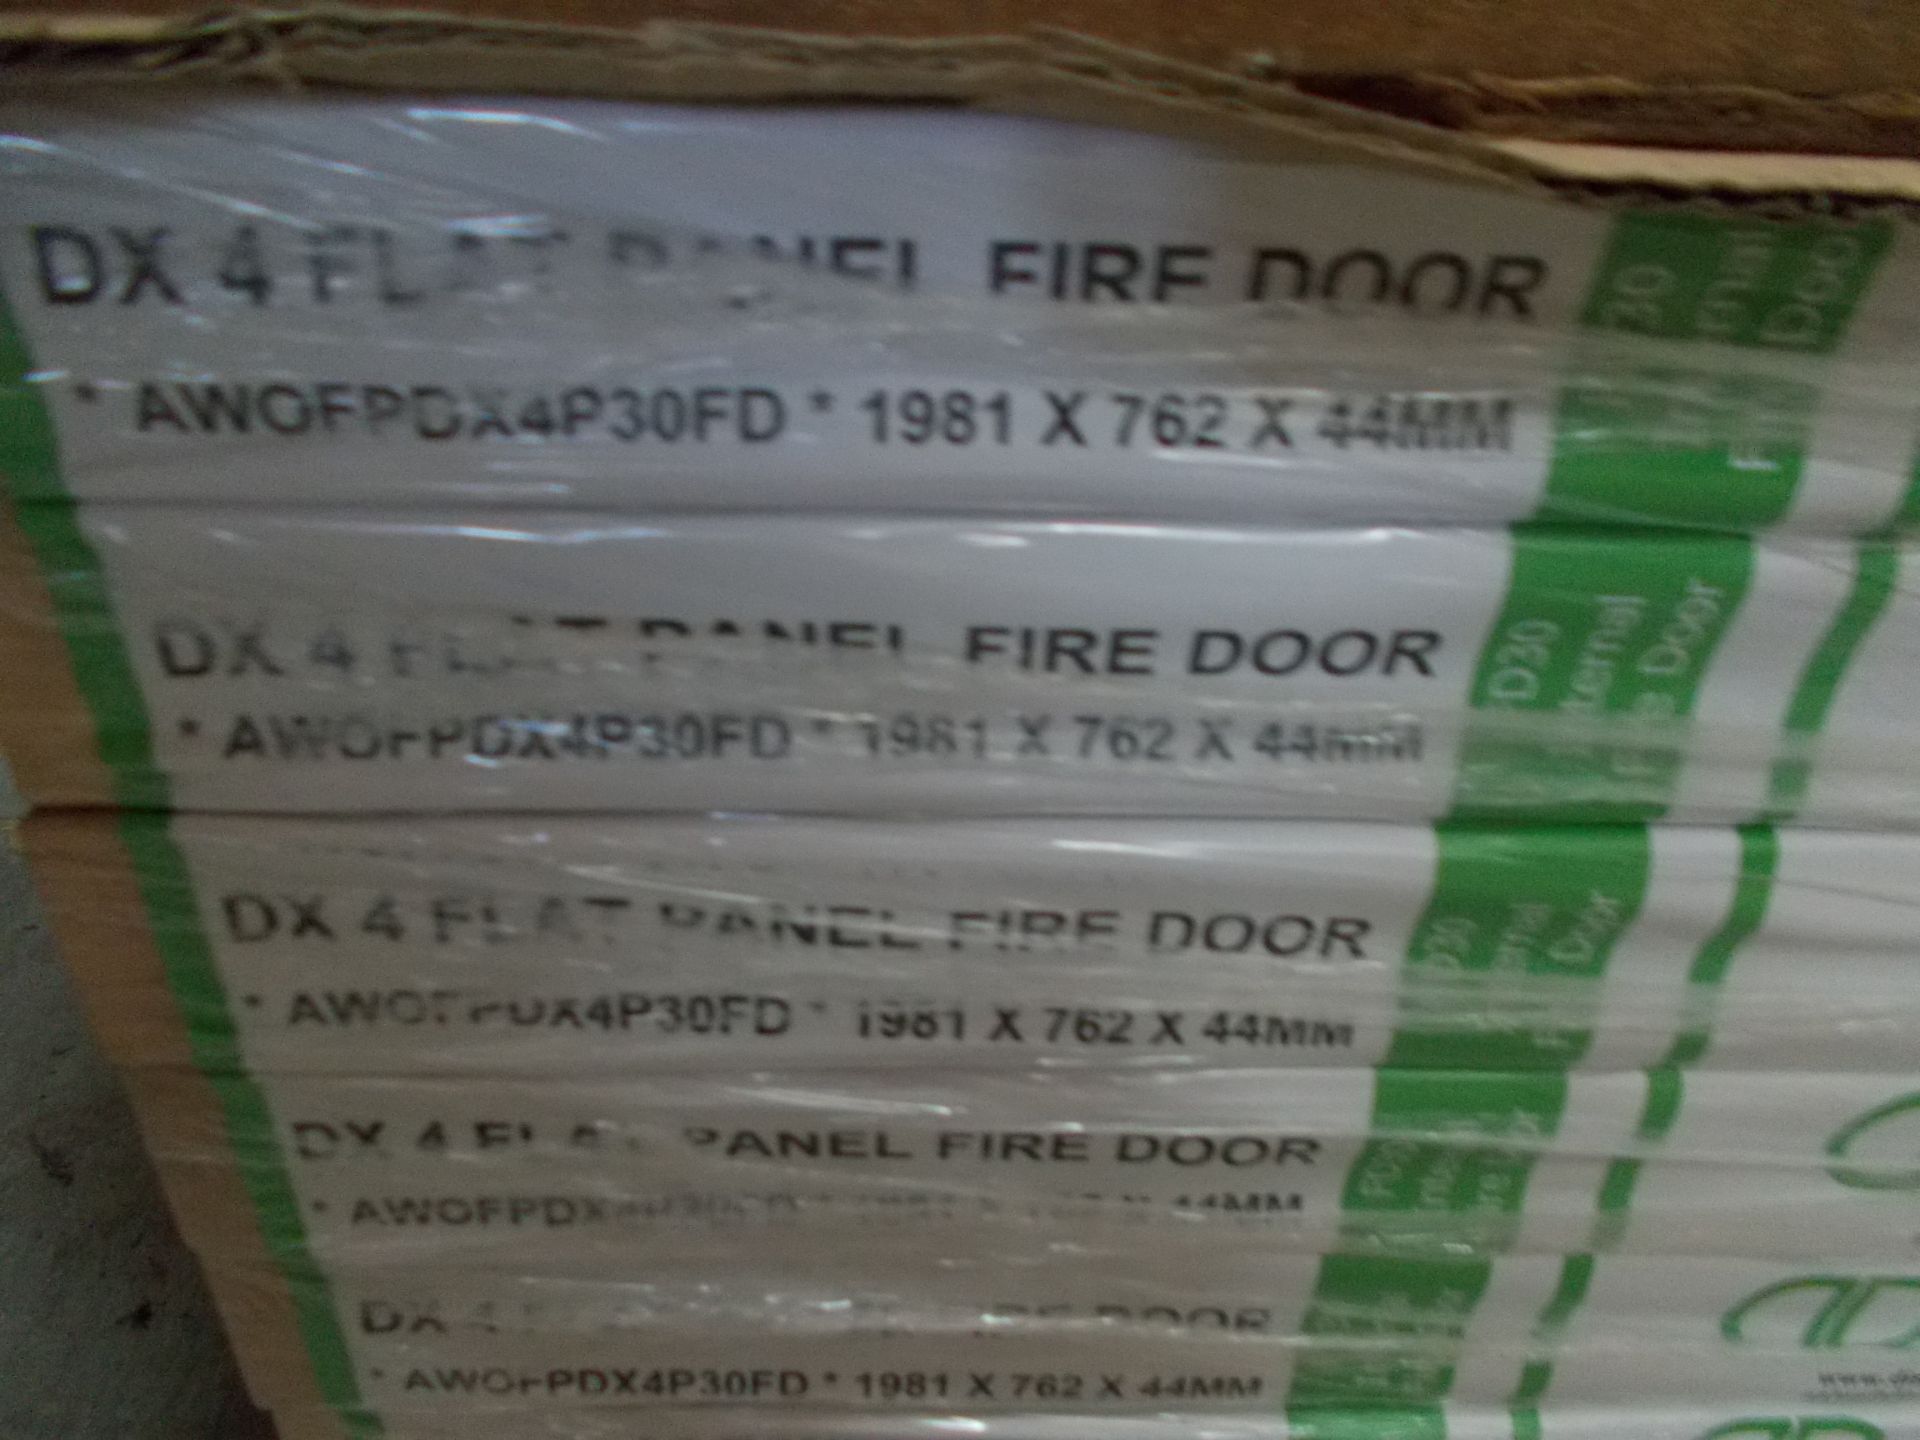 6 x DX 4 Flat Panel FD30 Int Fire Foor AWOFPDX4P30FD, 1981x762x44mm - Image 3 of 3